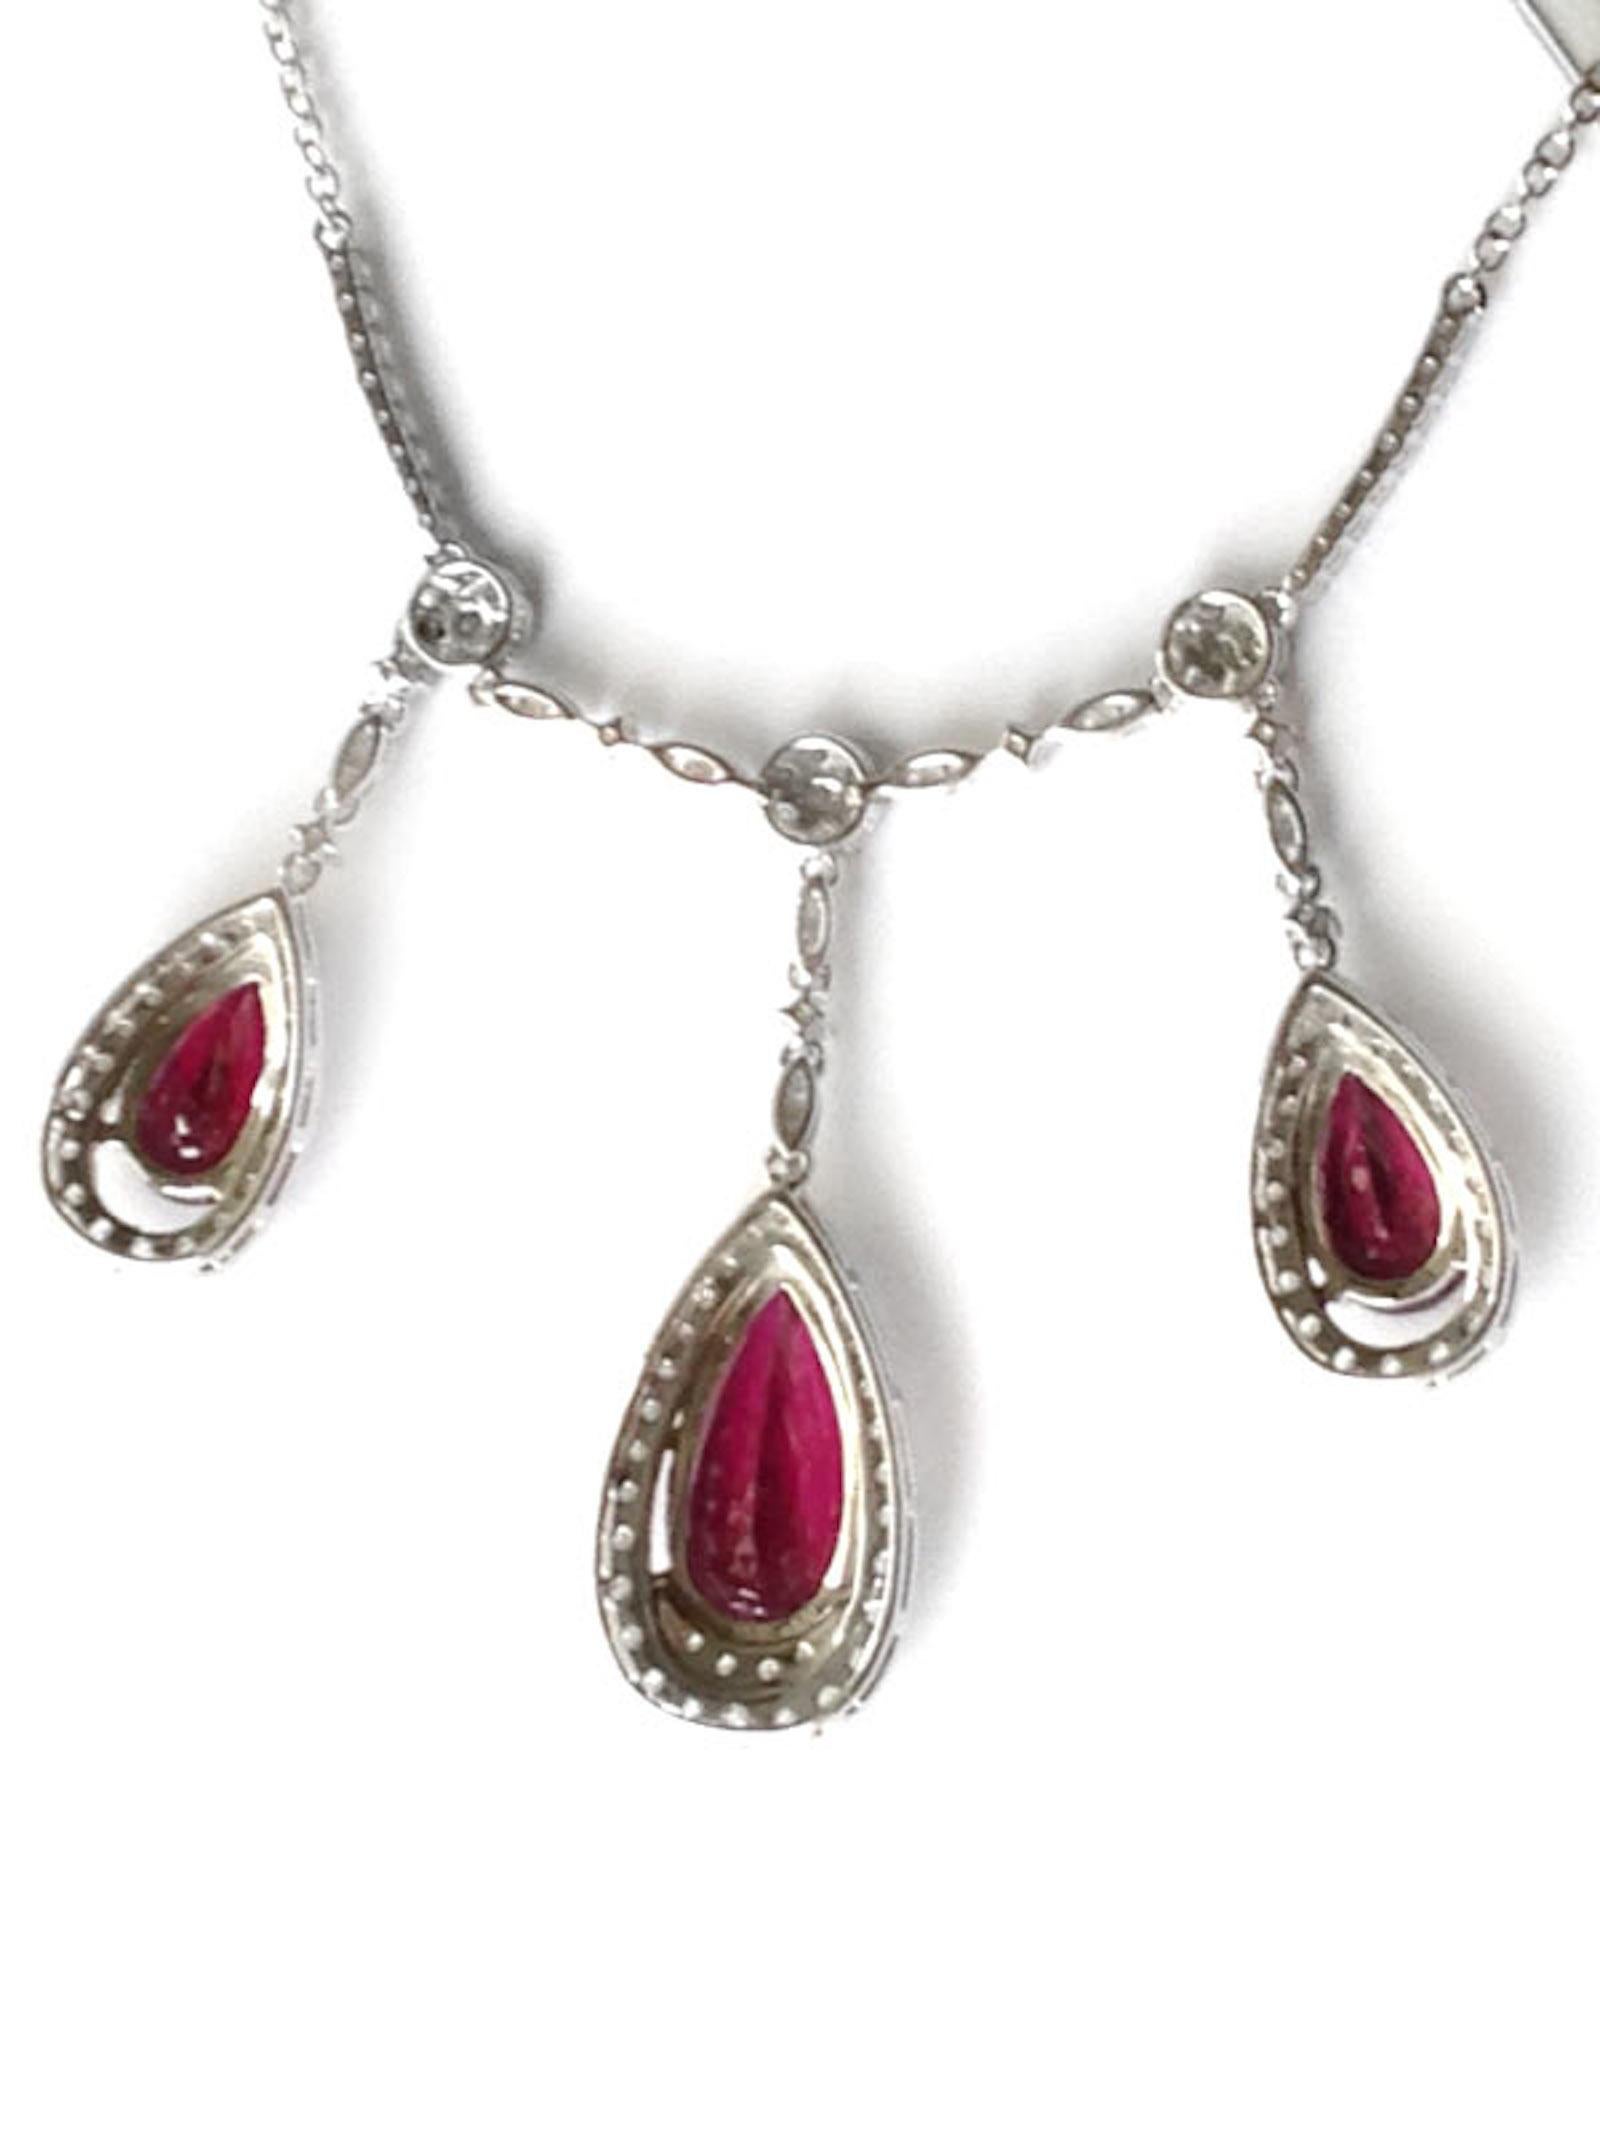 Behold this pendant adorned with three impeccably matched pear-cut Rubellites, each embraced by a sparkling diamond halo. This piece is a true dazzler, boasting a total of 9.37 carats and bursting with a rich fuchsia pink hue. The brilliance of the